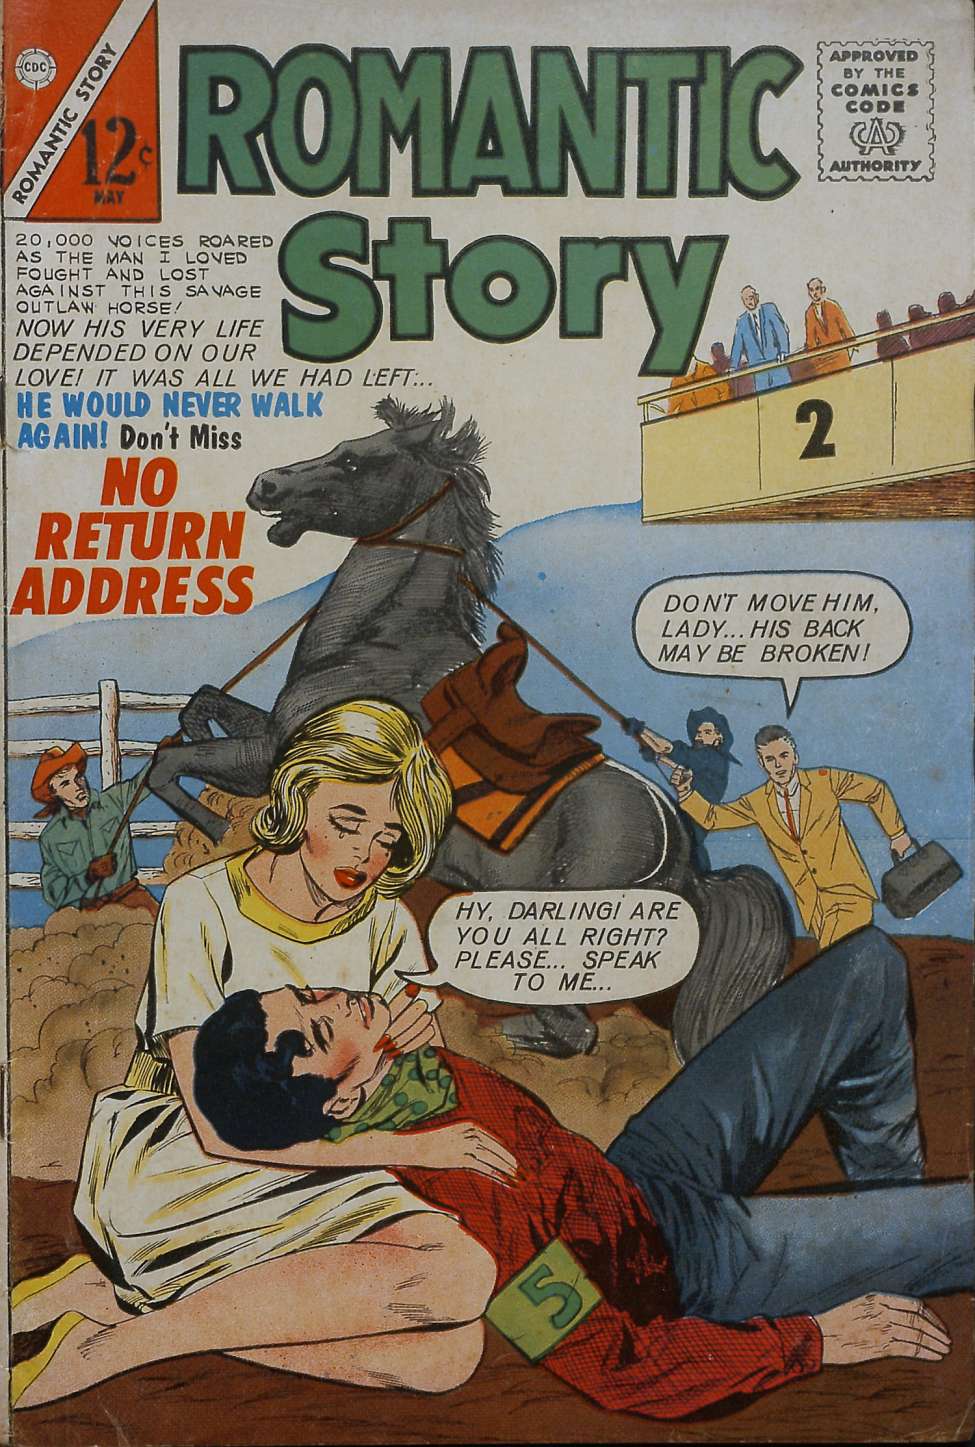 Comic Book Cover For Romantic Story 66